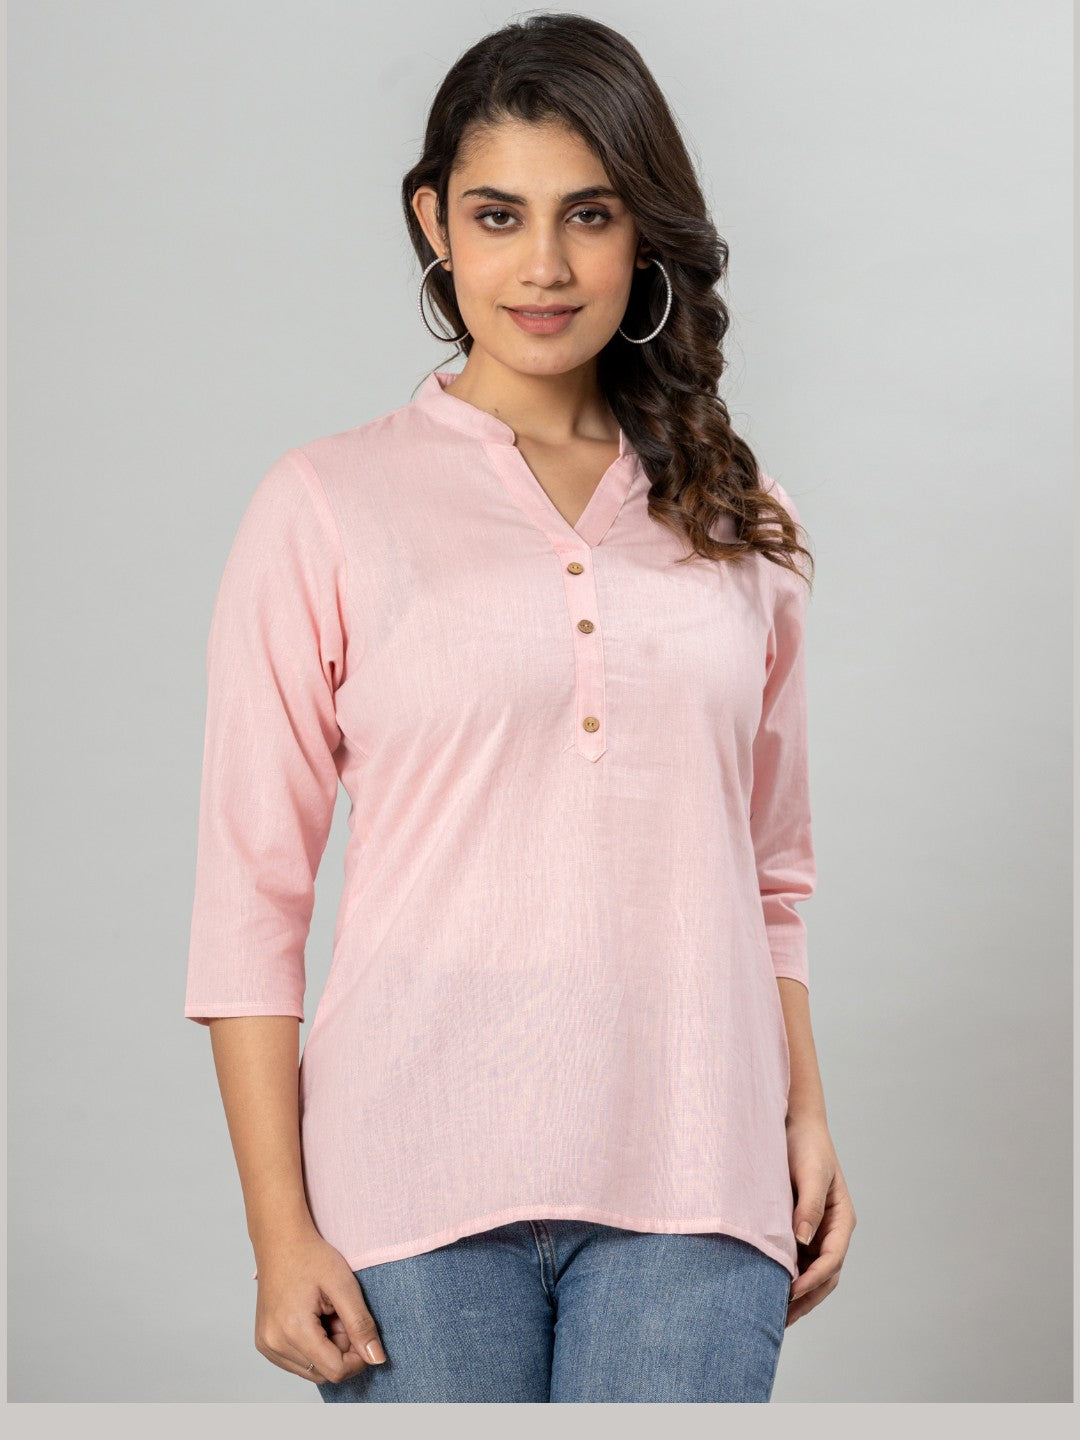 Solid Cotton Flax Women Top - Light Pink